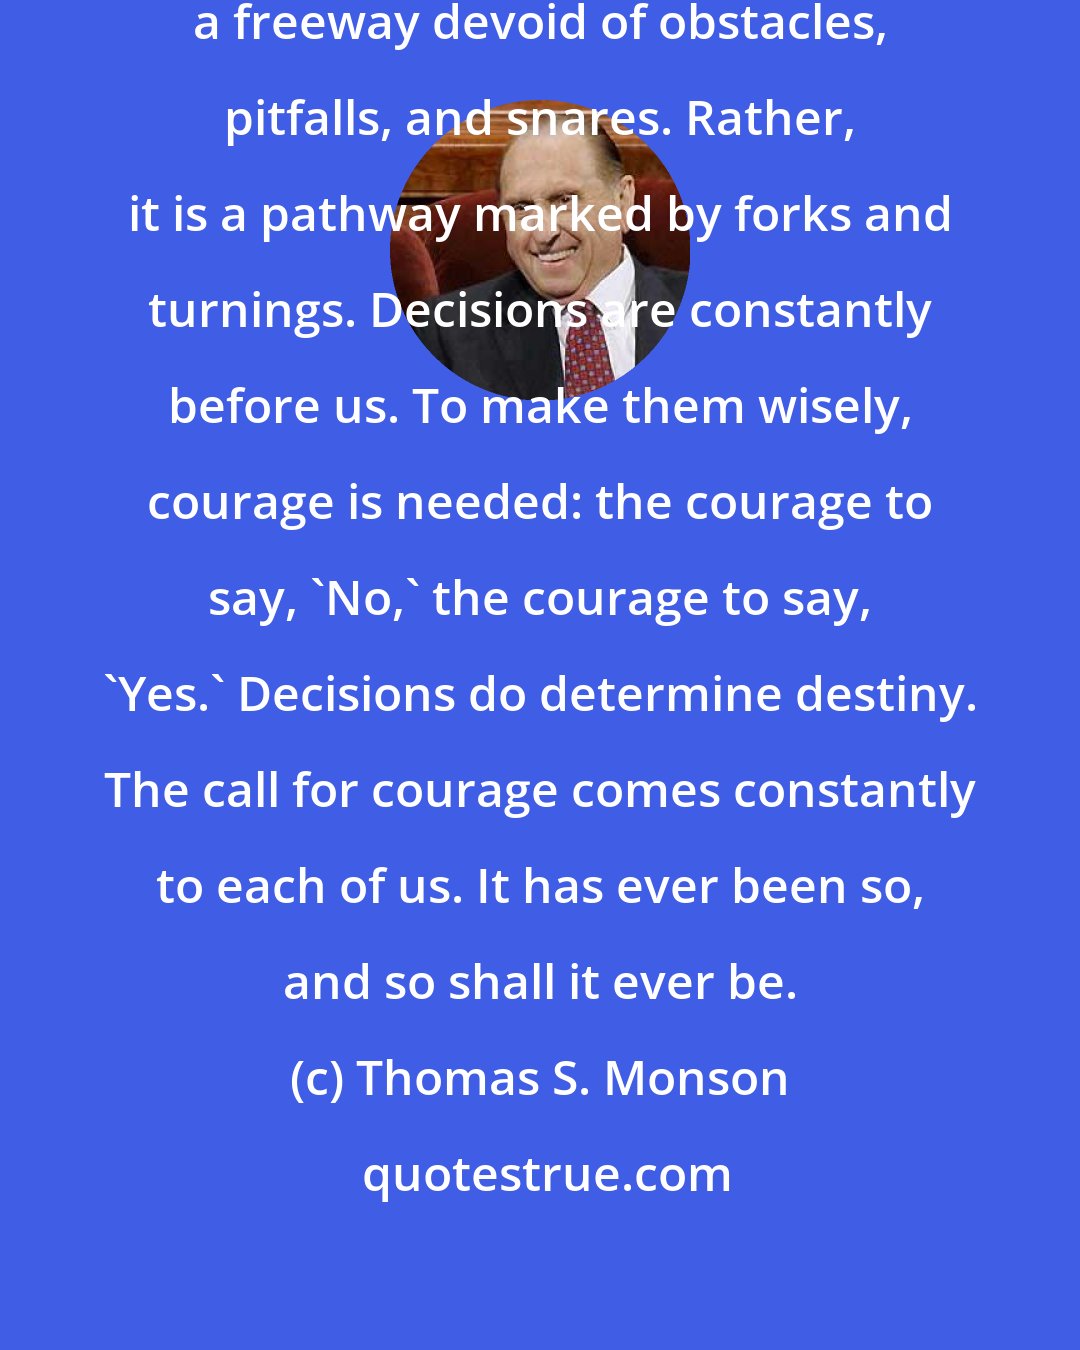 Thomas S. Monson: Life's journey is not traveled on a freeway devoid of obstacles, pitfalls, and snares. Rather, it is a pathway marked by forks and turnings. Decisions are constantly before us. To make them wisely, courage is needed: the courage to say, 'No,' the courage to say, 'Yes.' Decisions do determine destiny. The call for courage comes constantly to each of us. It has ever been so, and so shall it ever be.